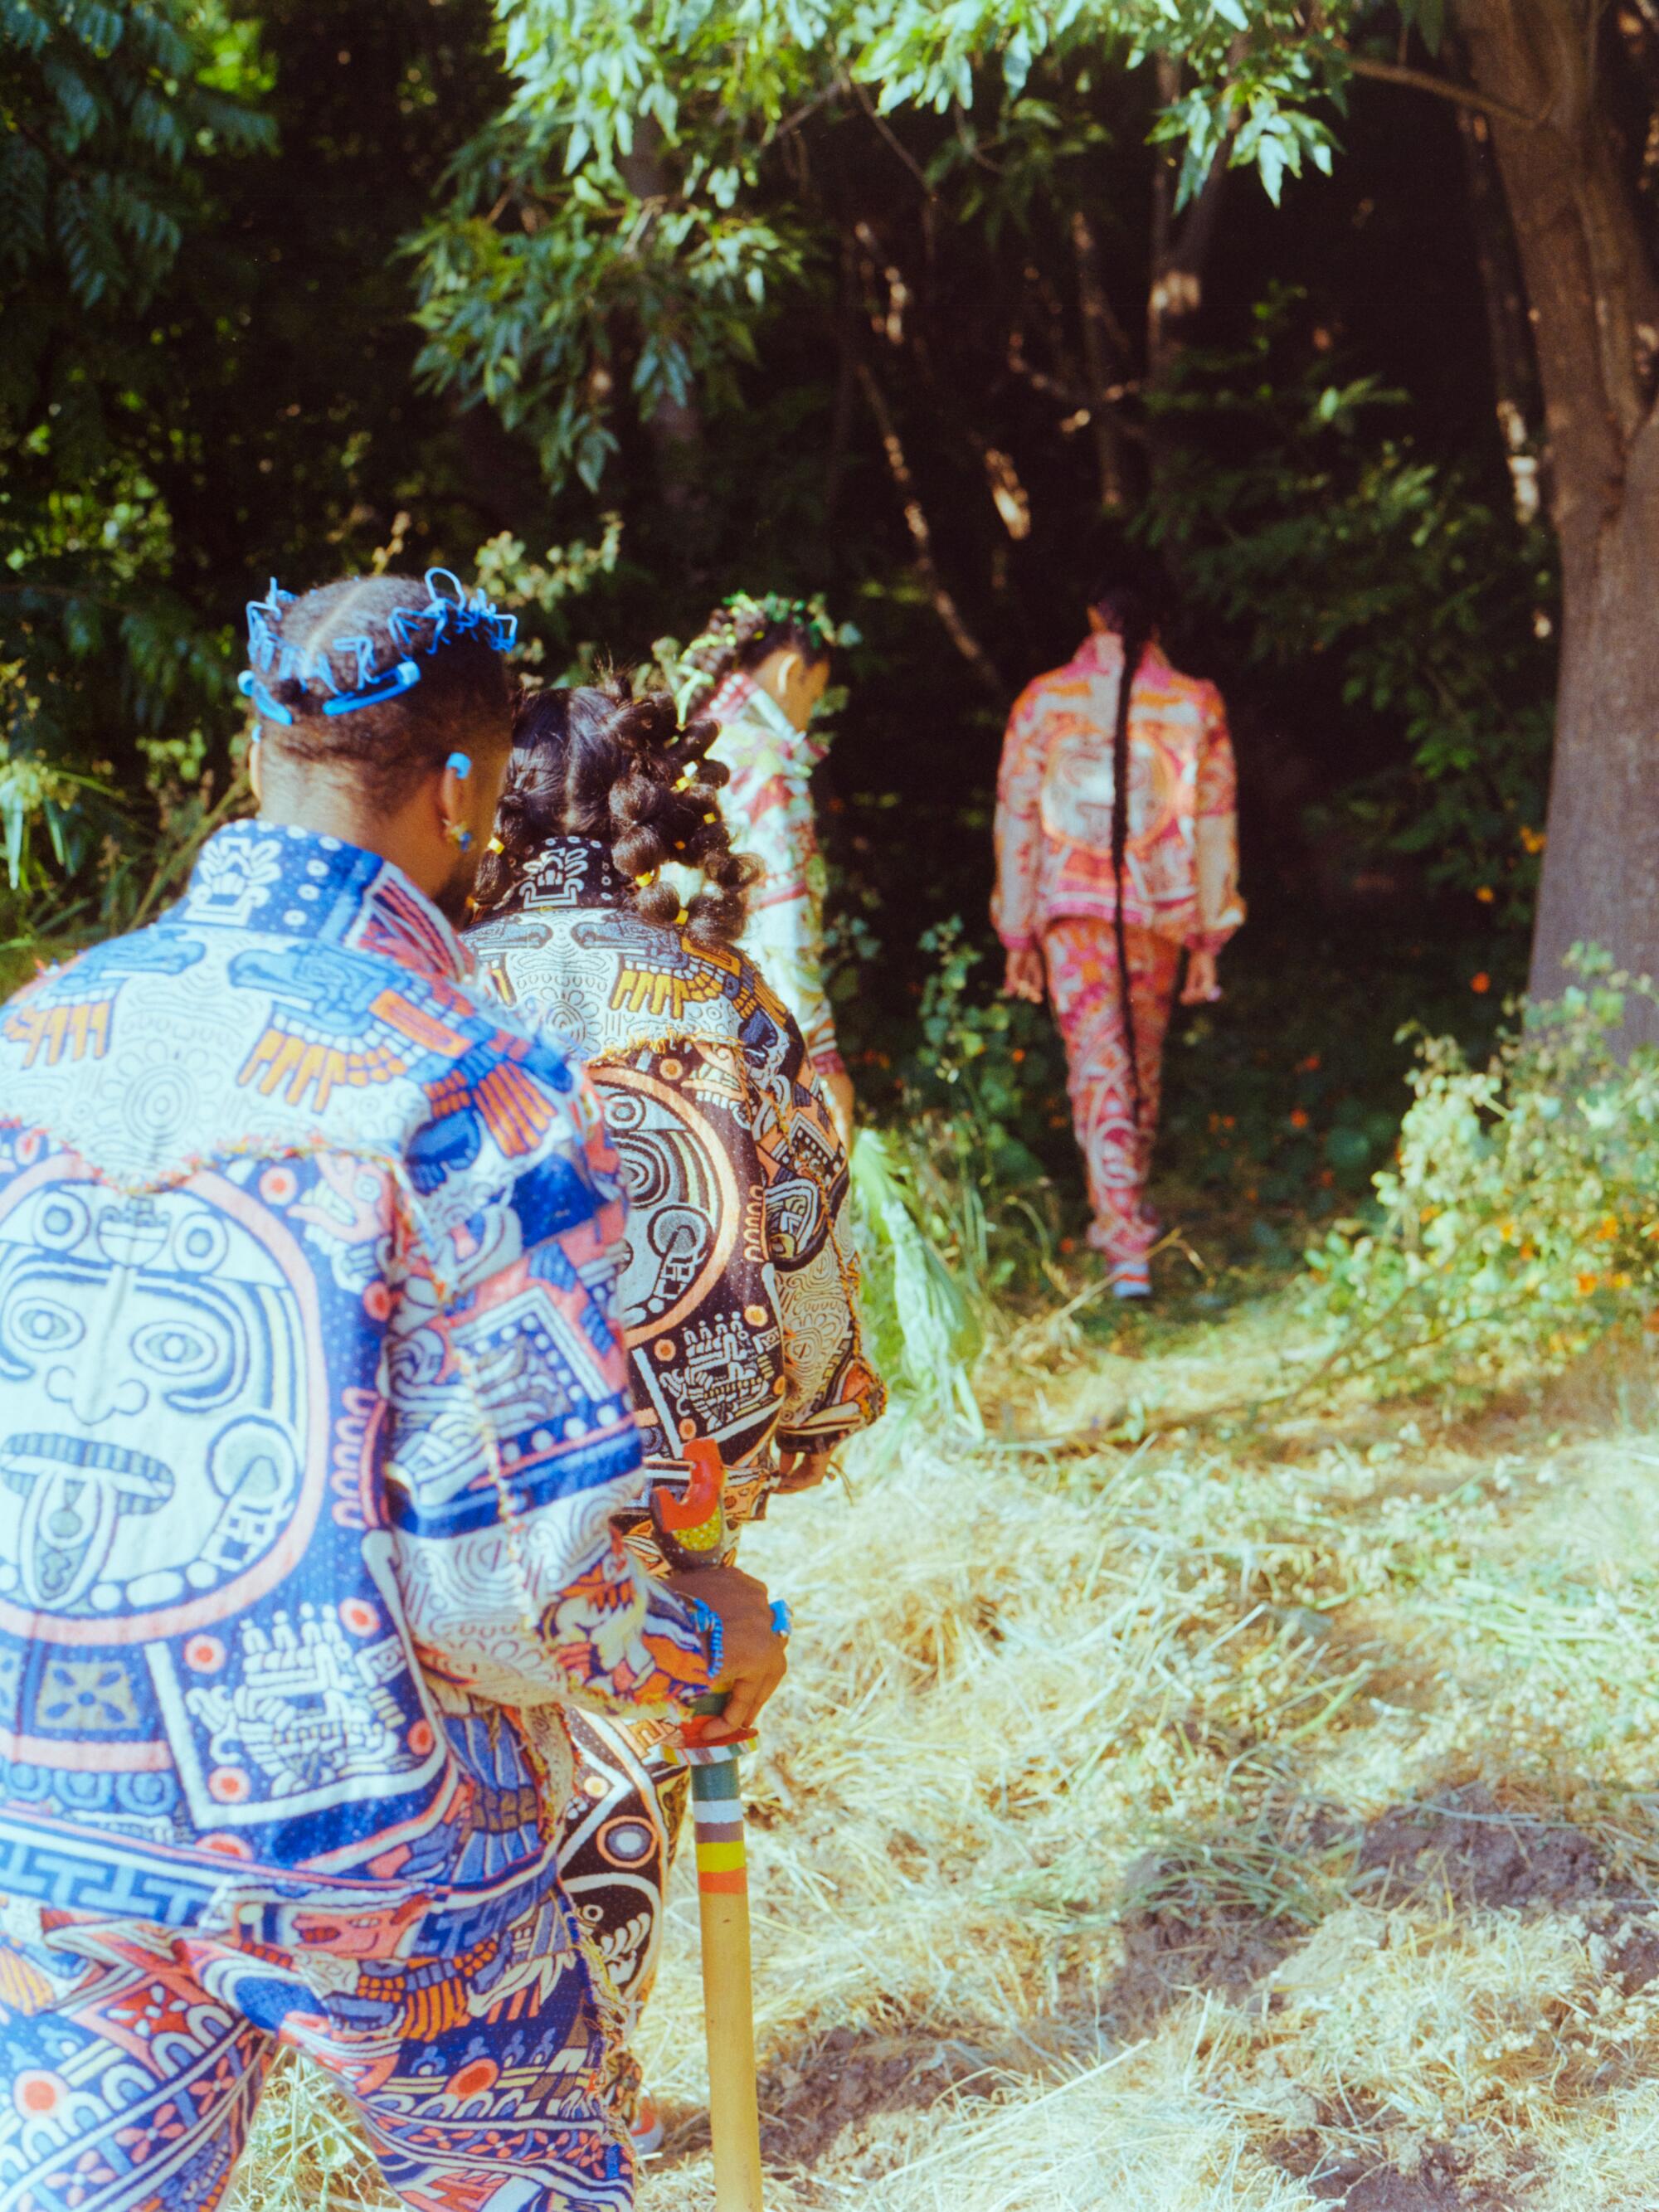 Four people in colorful outfits walk through an opening in the brush.